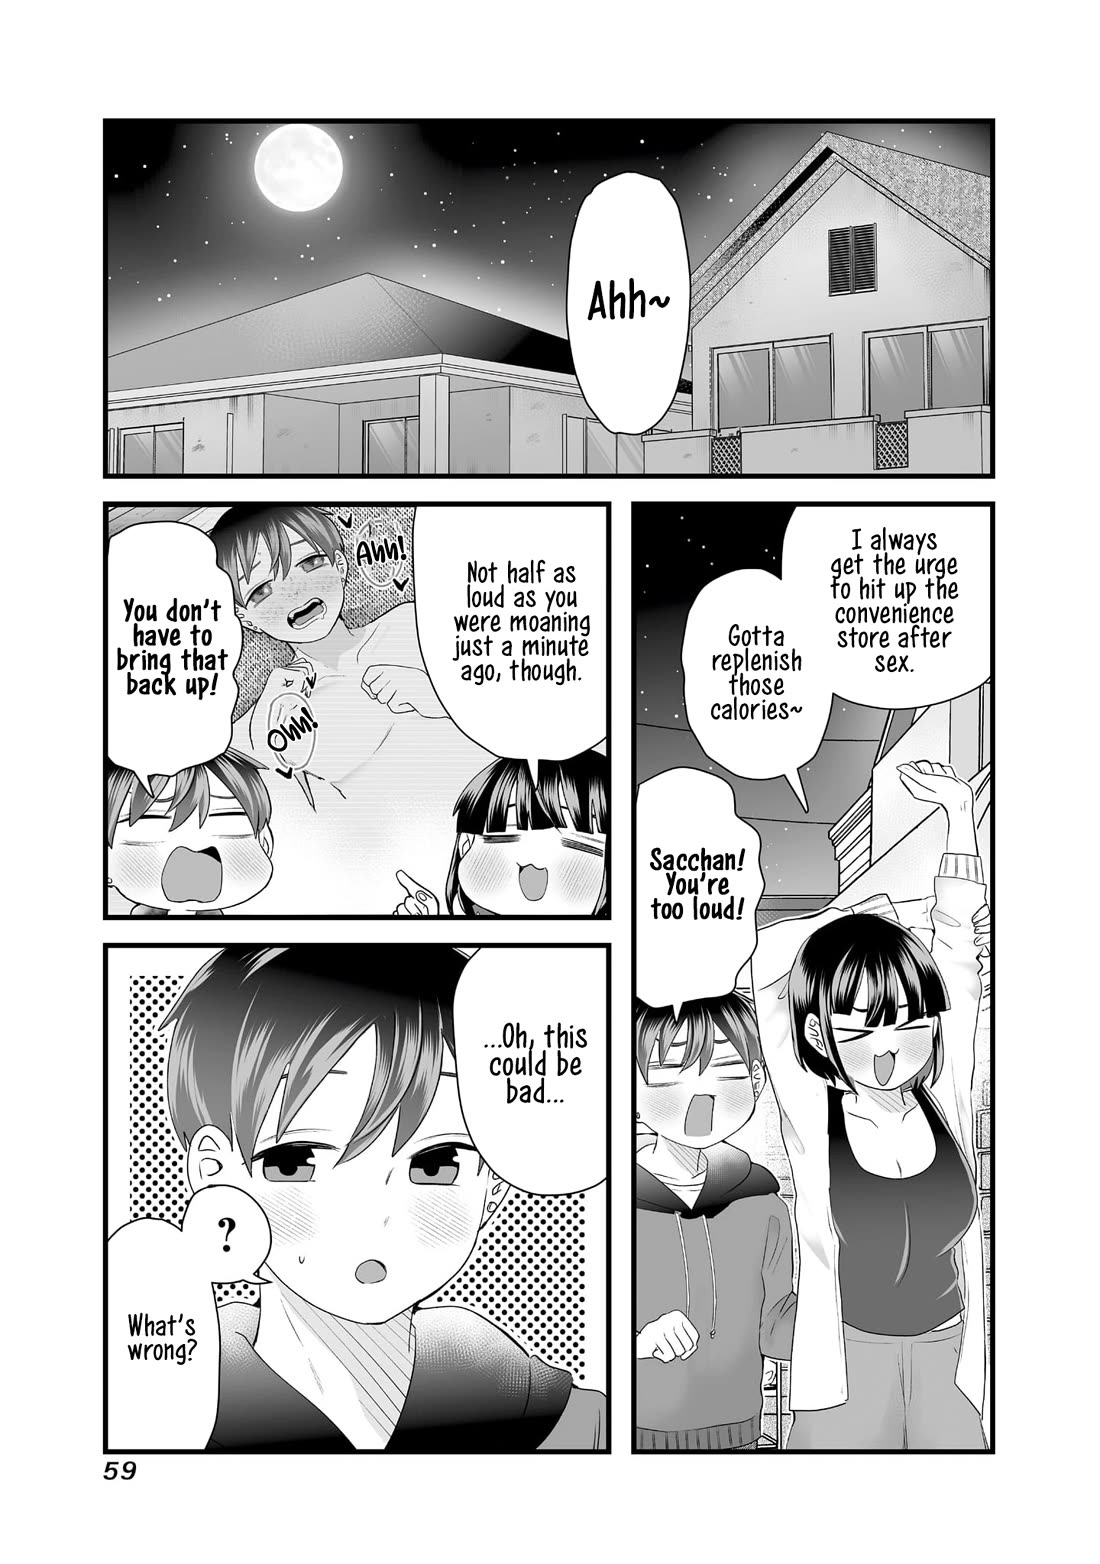 Sacchan and Ken-chan Are Going at it Again - chapter 7 - #3